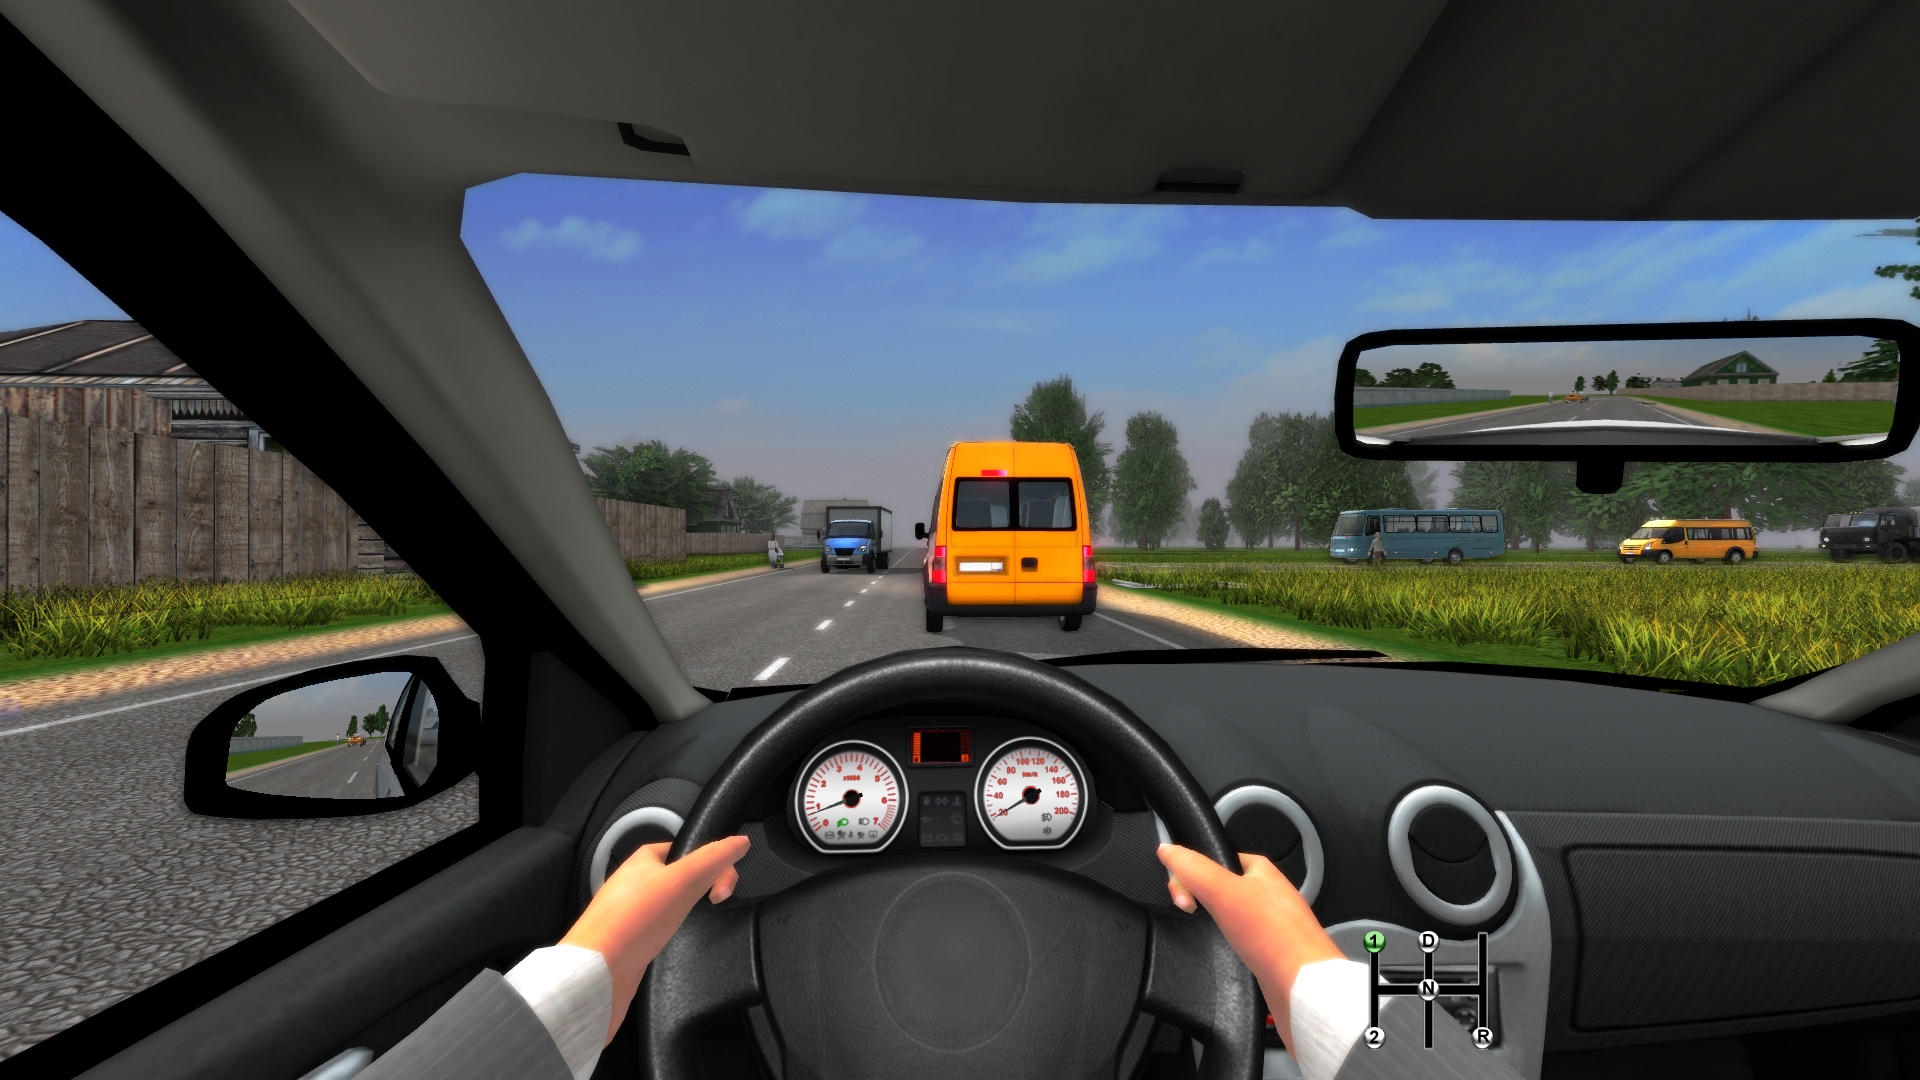 3d driving simulator on google maps with moving traffic